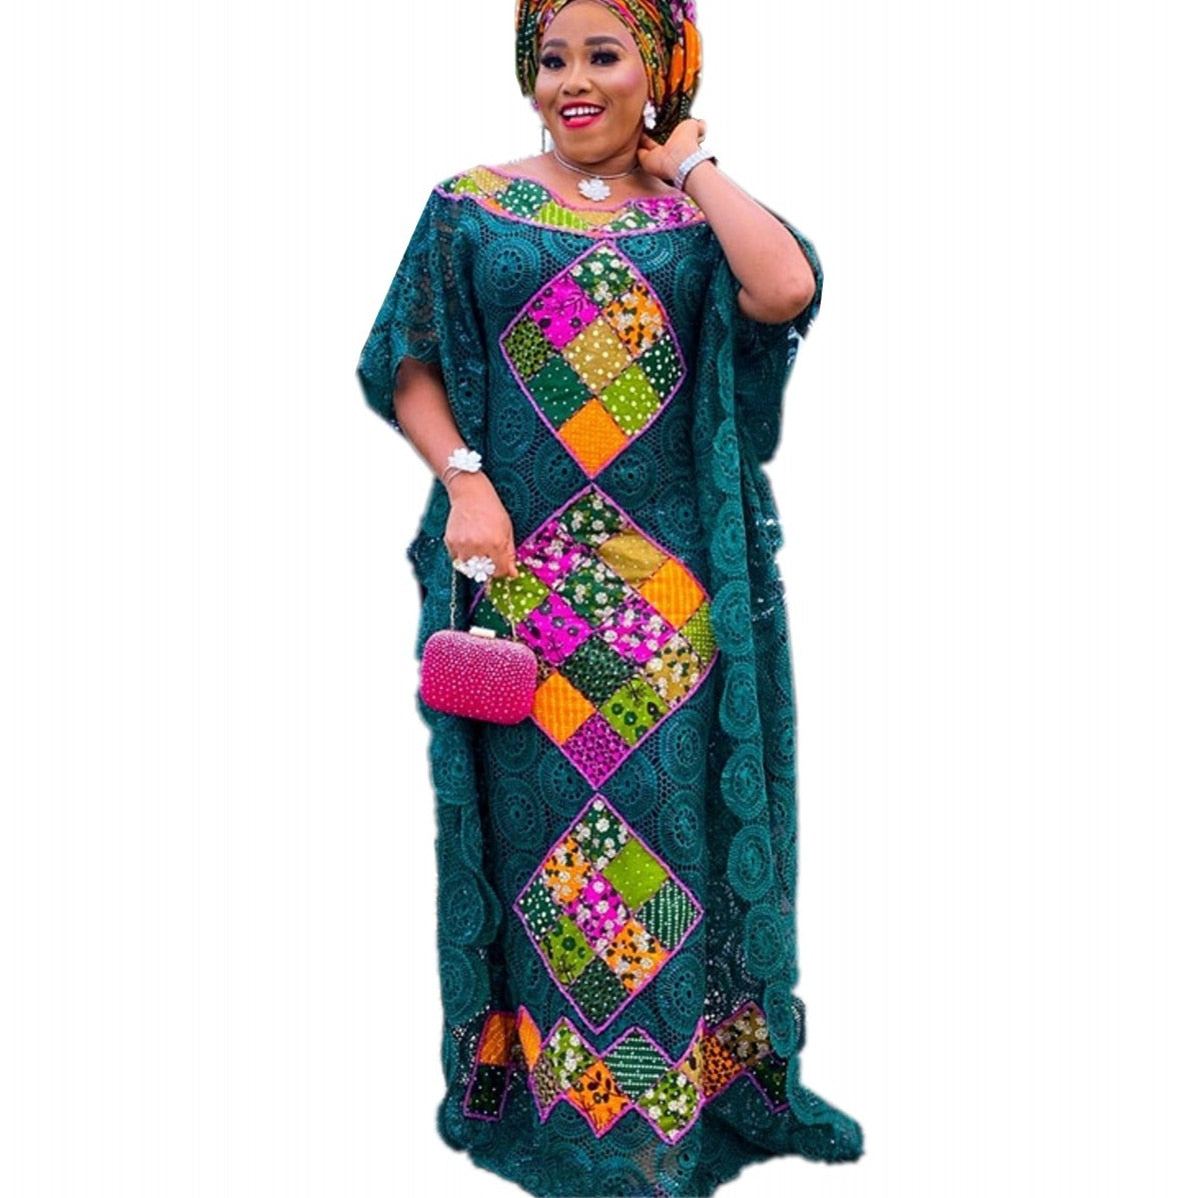 African Lace Dresses Online Women Evening Gown Party Dress-FrenzyAfricanFashion.com